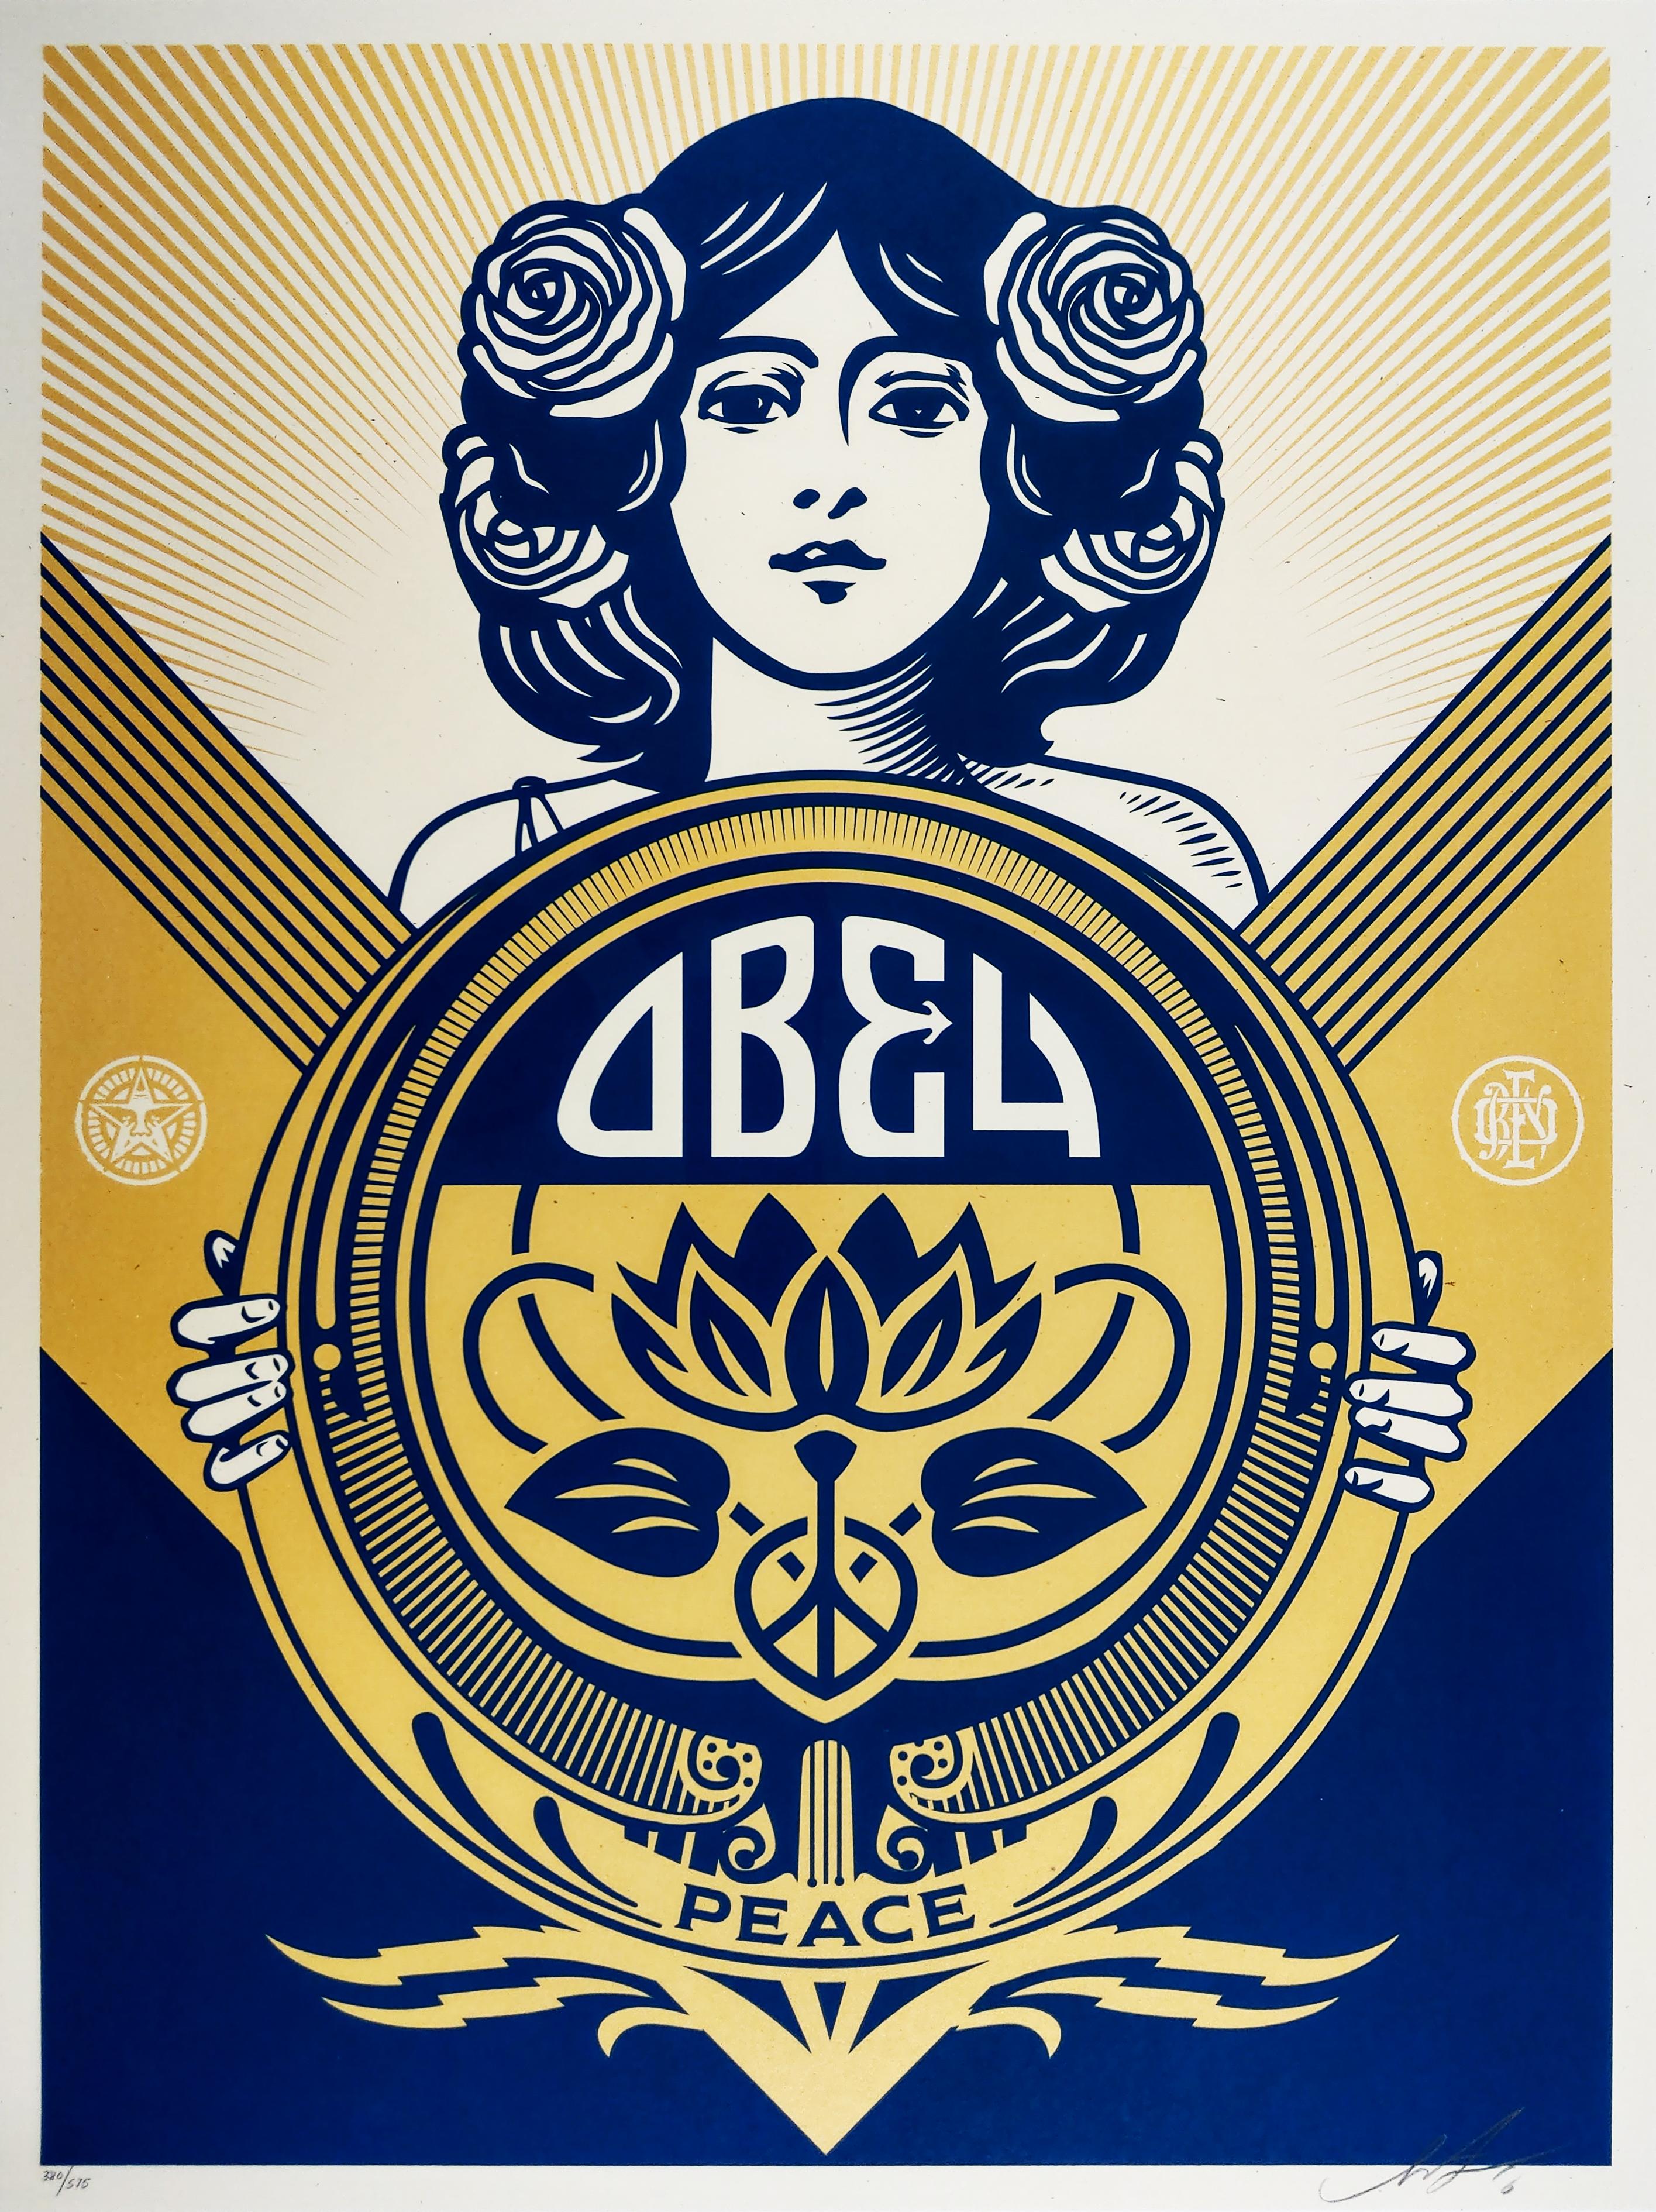 Obey Holiday 2016. 18 x 24 inches. Screen Print. Signed by Shepard Fairey. Edition of 575.

"I make a holiday print every year as a gift for friends and supporters, which is usually a different color way of an image with a positive theme that I